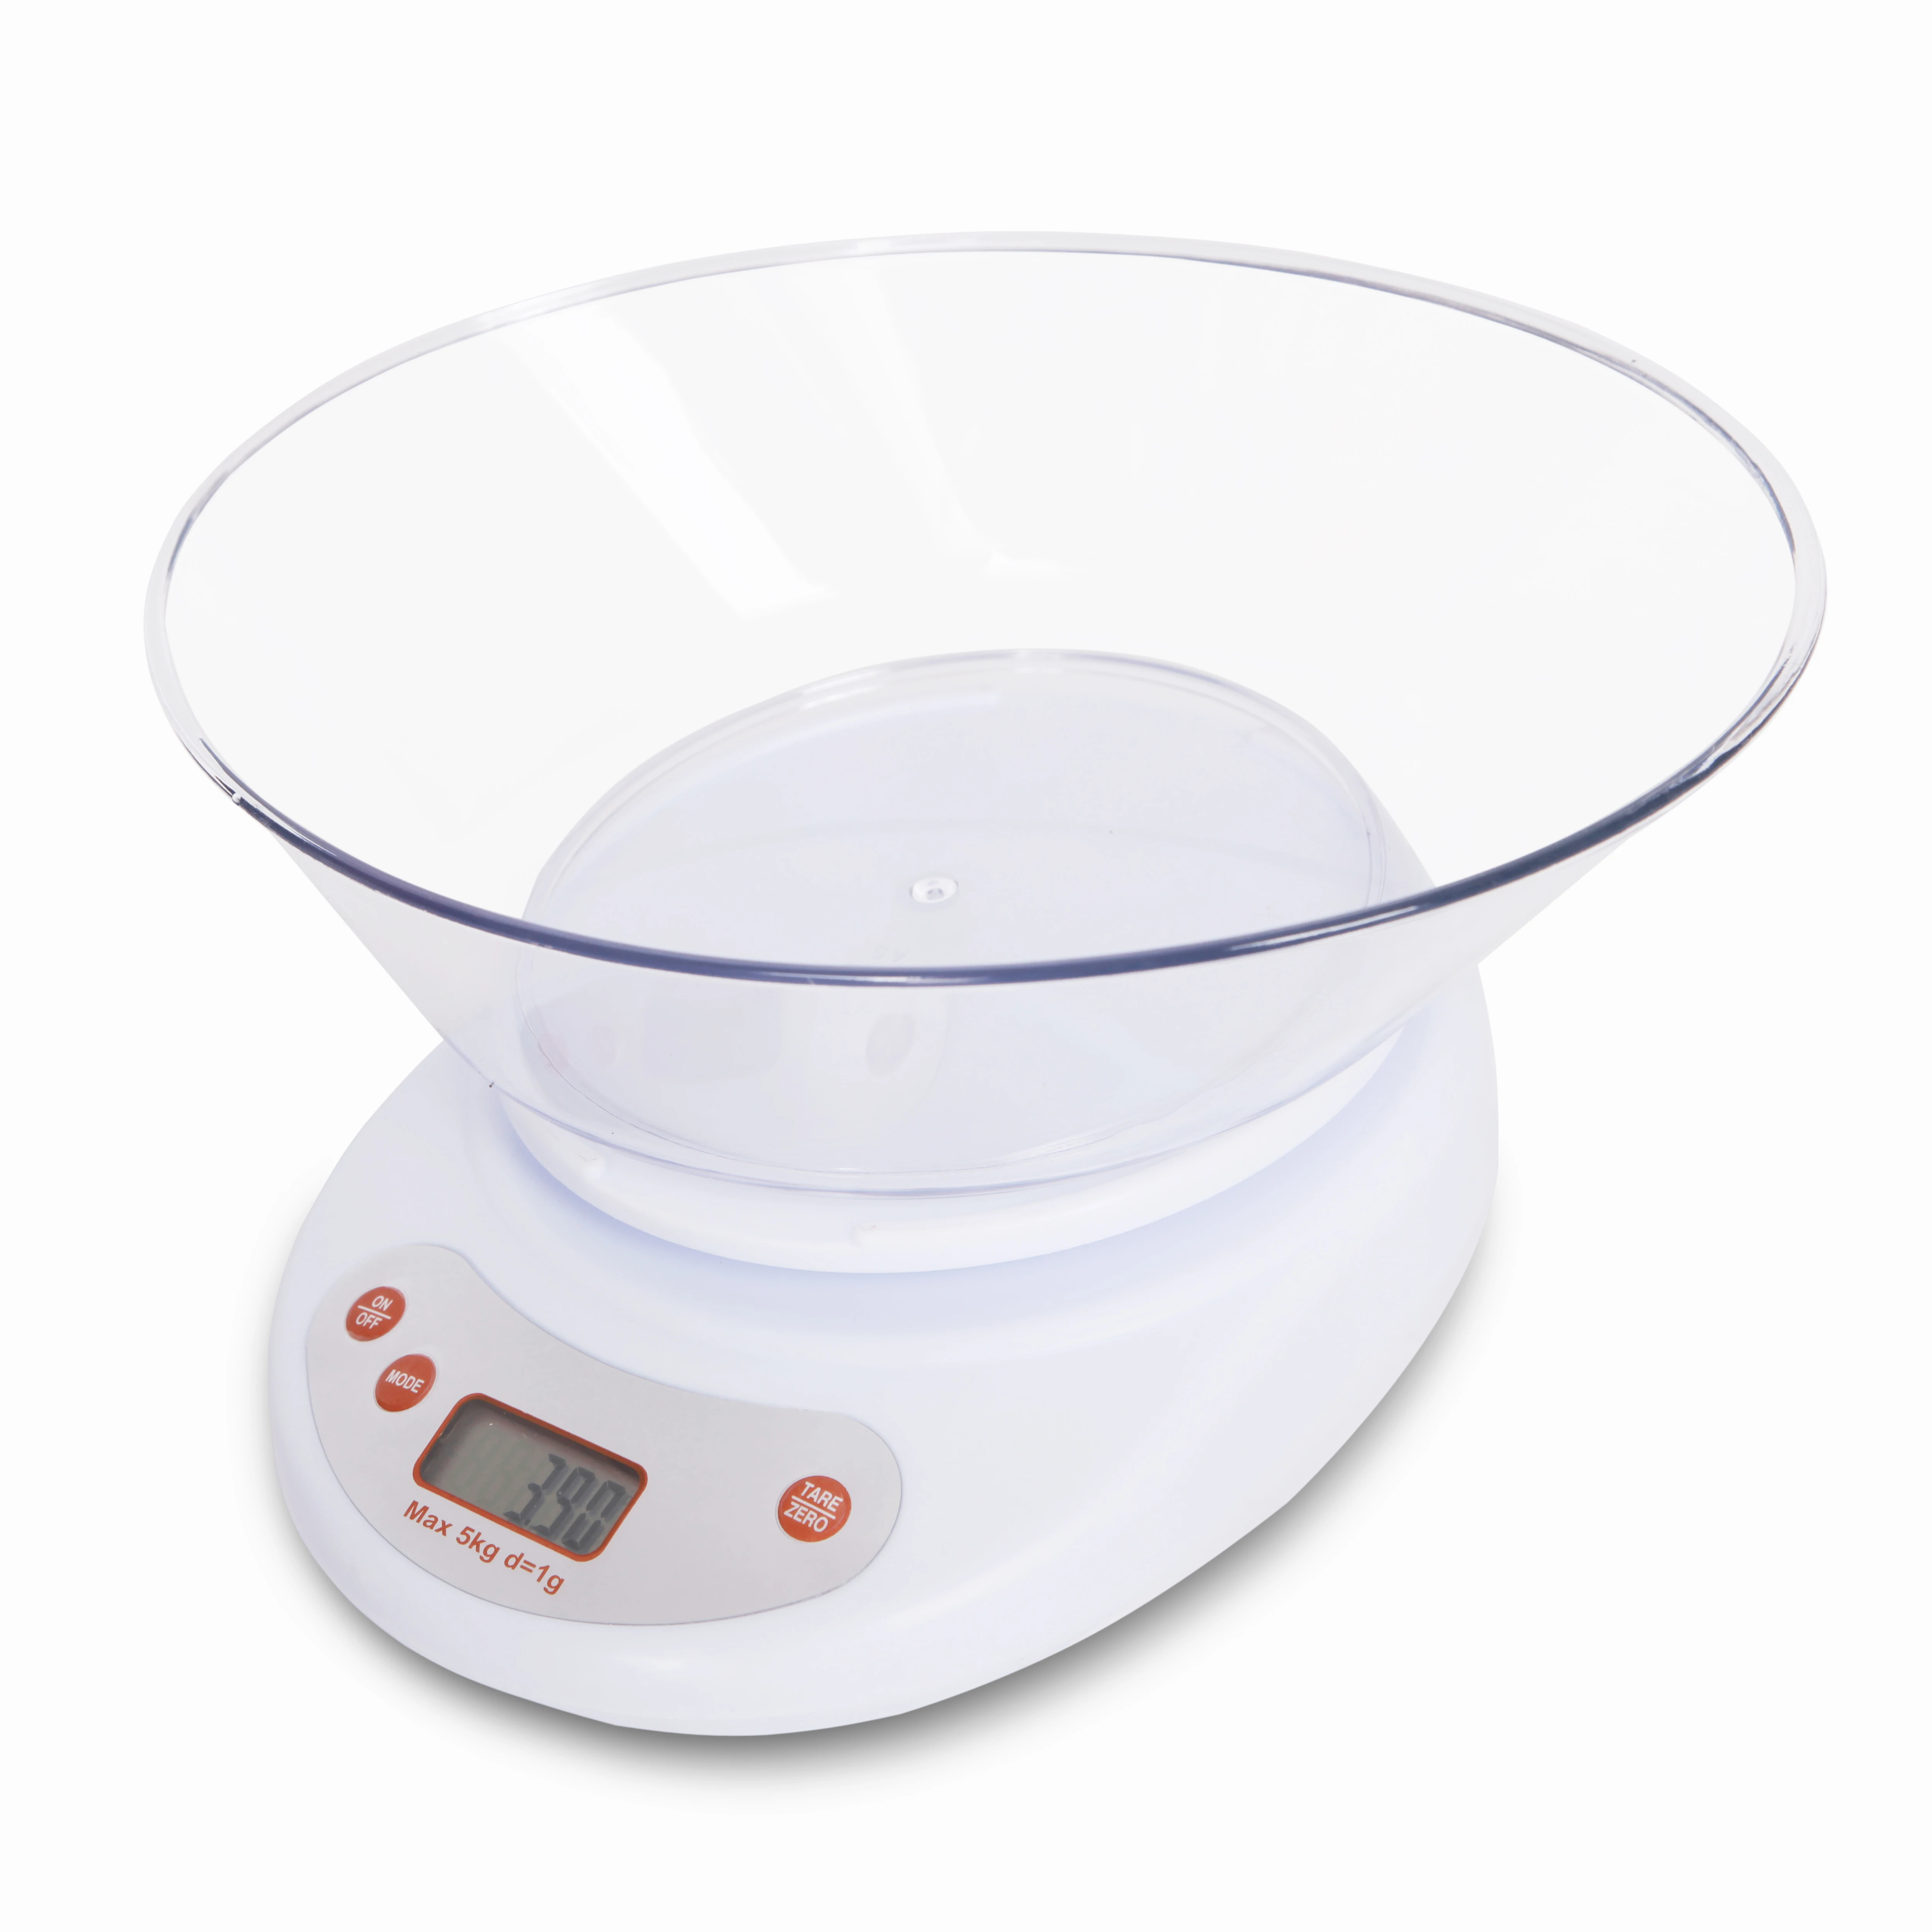 

Food Kitchen Bowl Scale Digital Weighing for Cooking Diet Weight Loss 11lb/5kg Backlit LCD Display